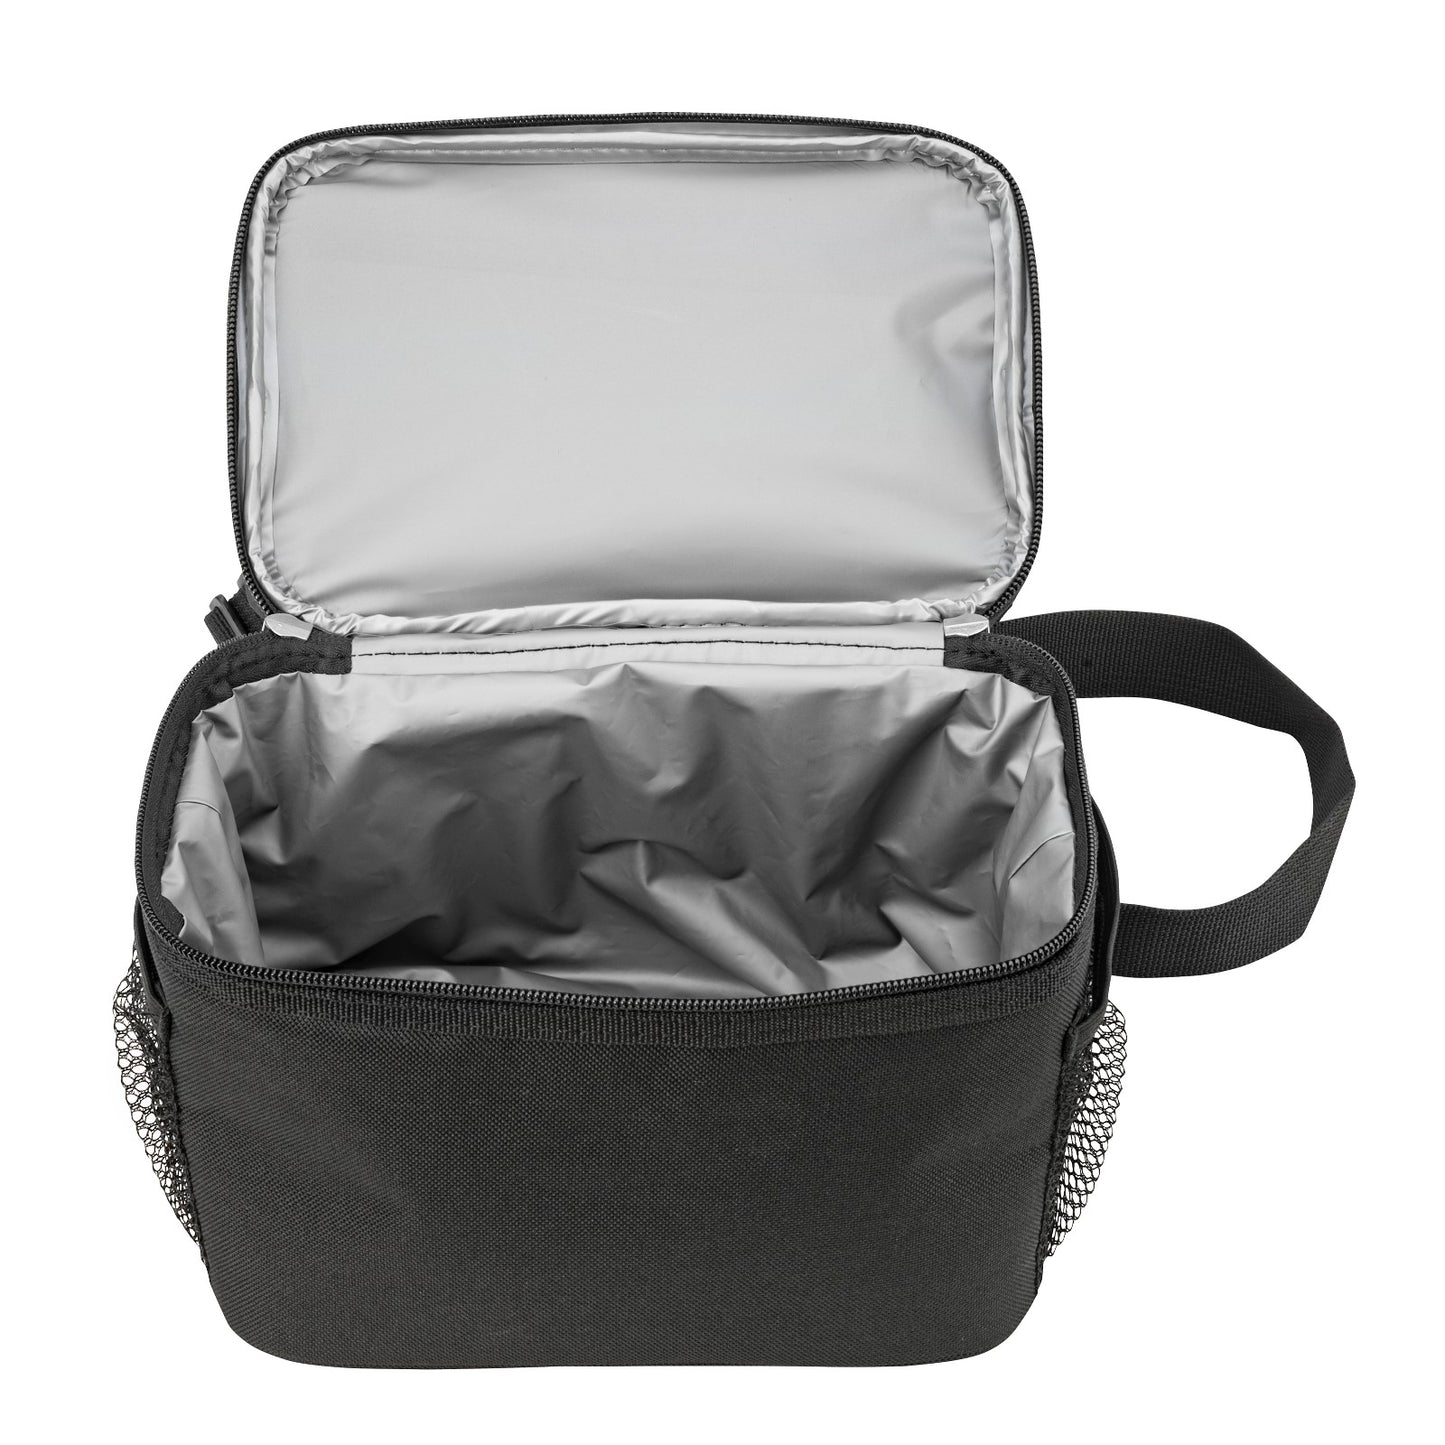 Compact Lunch Cooler - 2 Insulated Compartments - Color Black